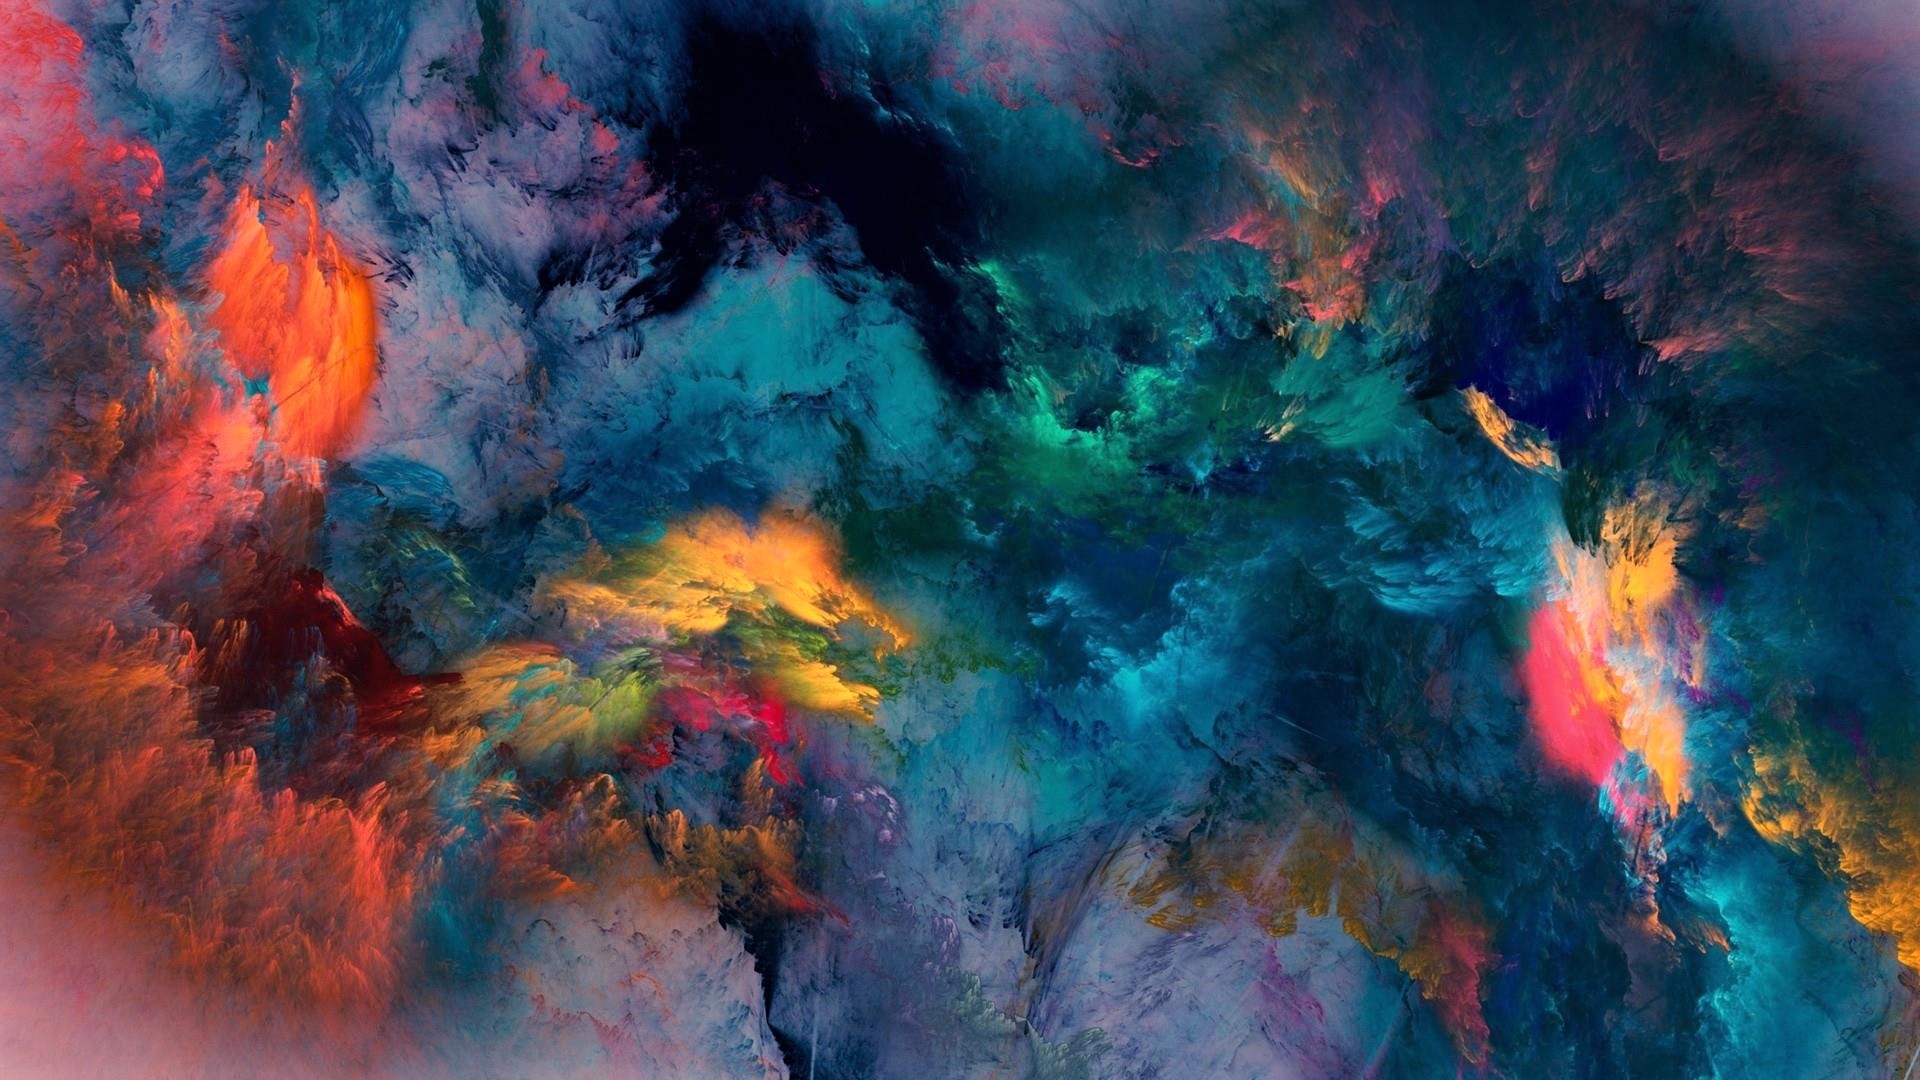 Abstract Colors HD Wallpaper | Background Image | 1920x1080